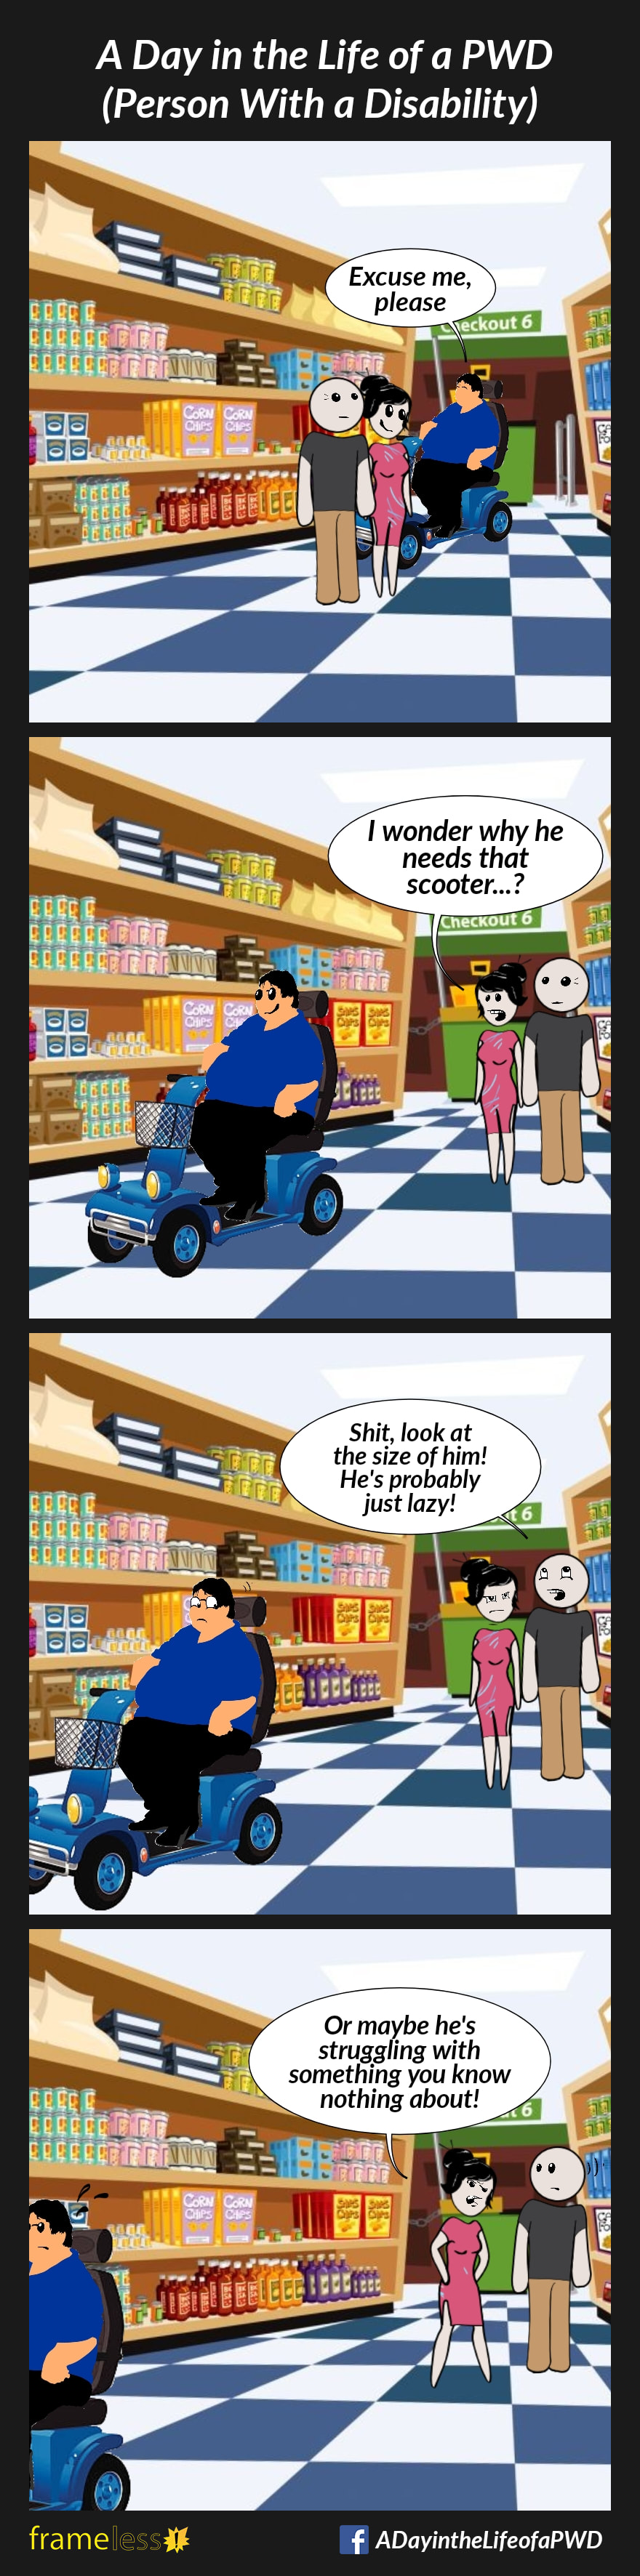 COMIC STRIP 
A Day in the Life of a PWD (Person With a Disability) 

Frame 1:
A woman and man stand in a grocery store aisle. A fat man using a mobility scooter enters the aisle and says, 